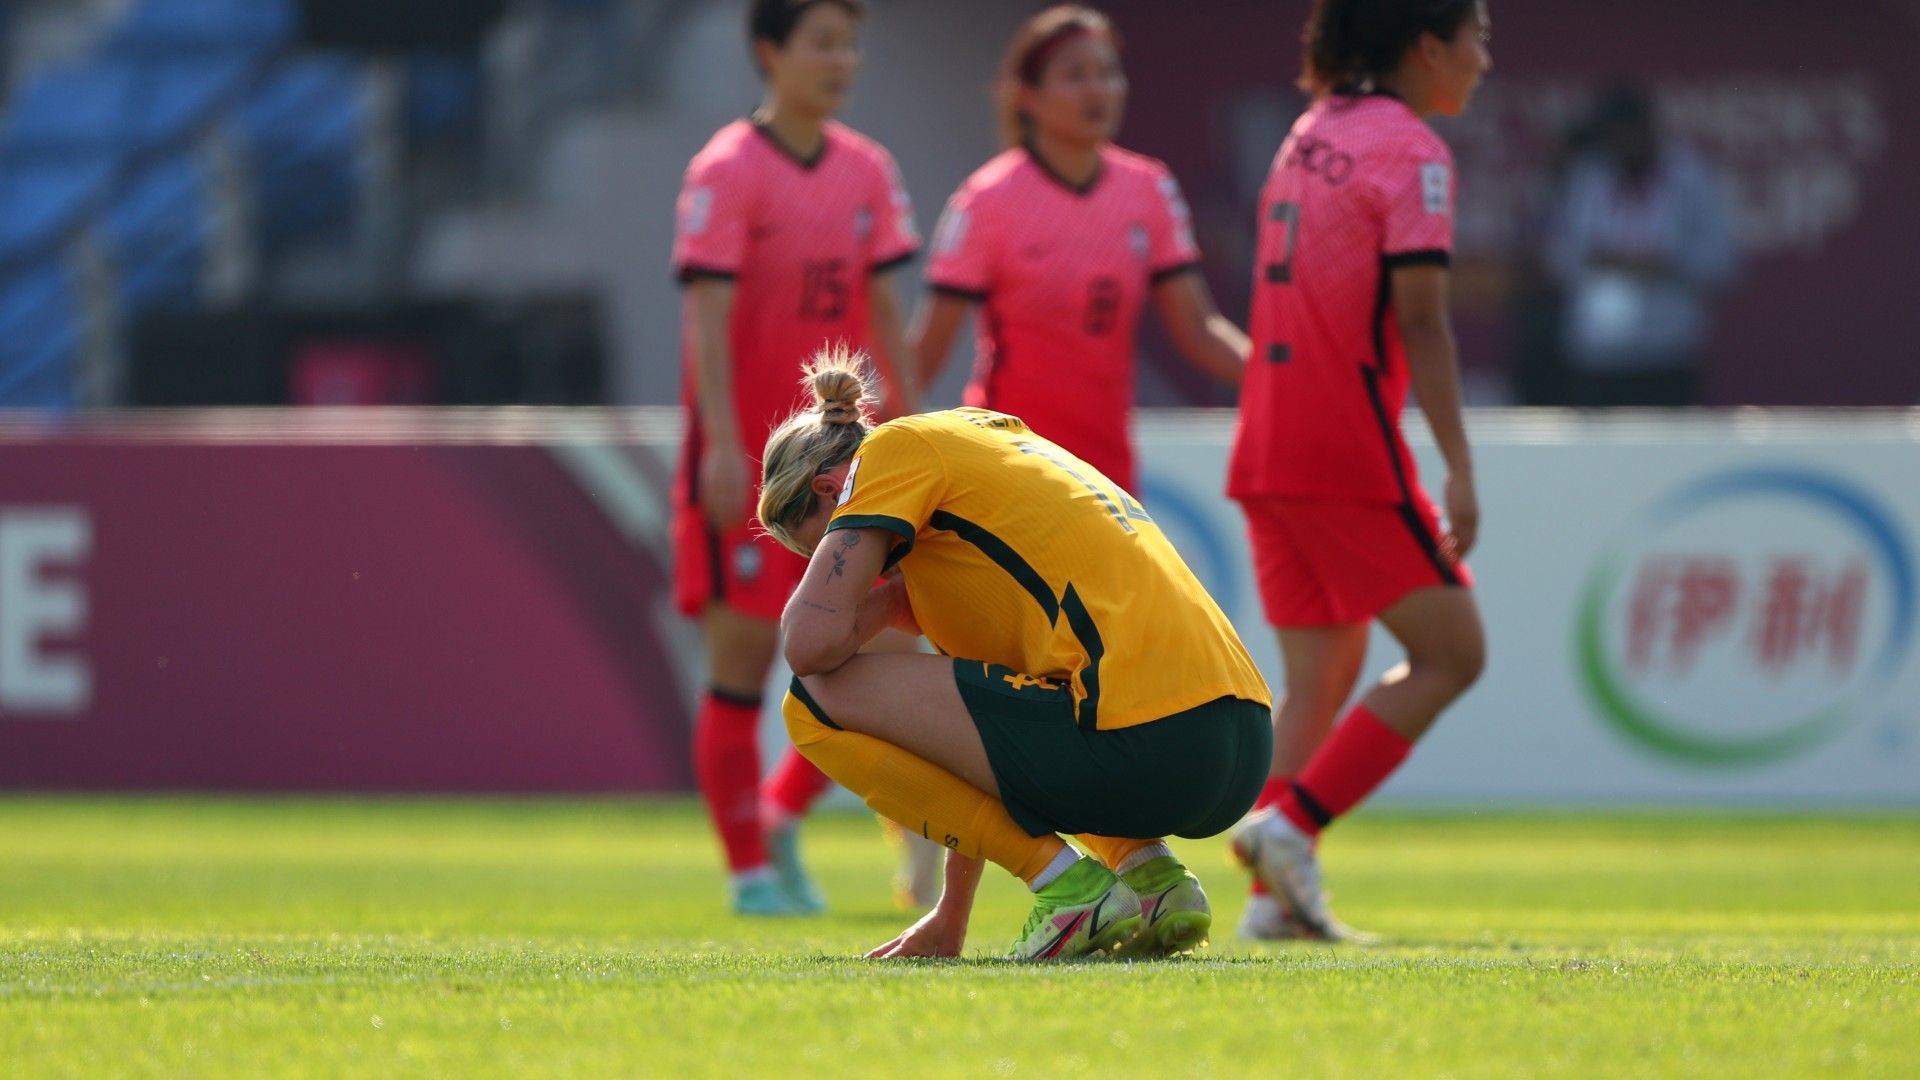 Uncertain future ahead for Matildas after shock loss